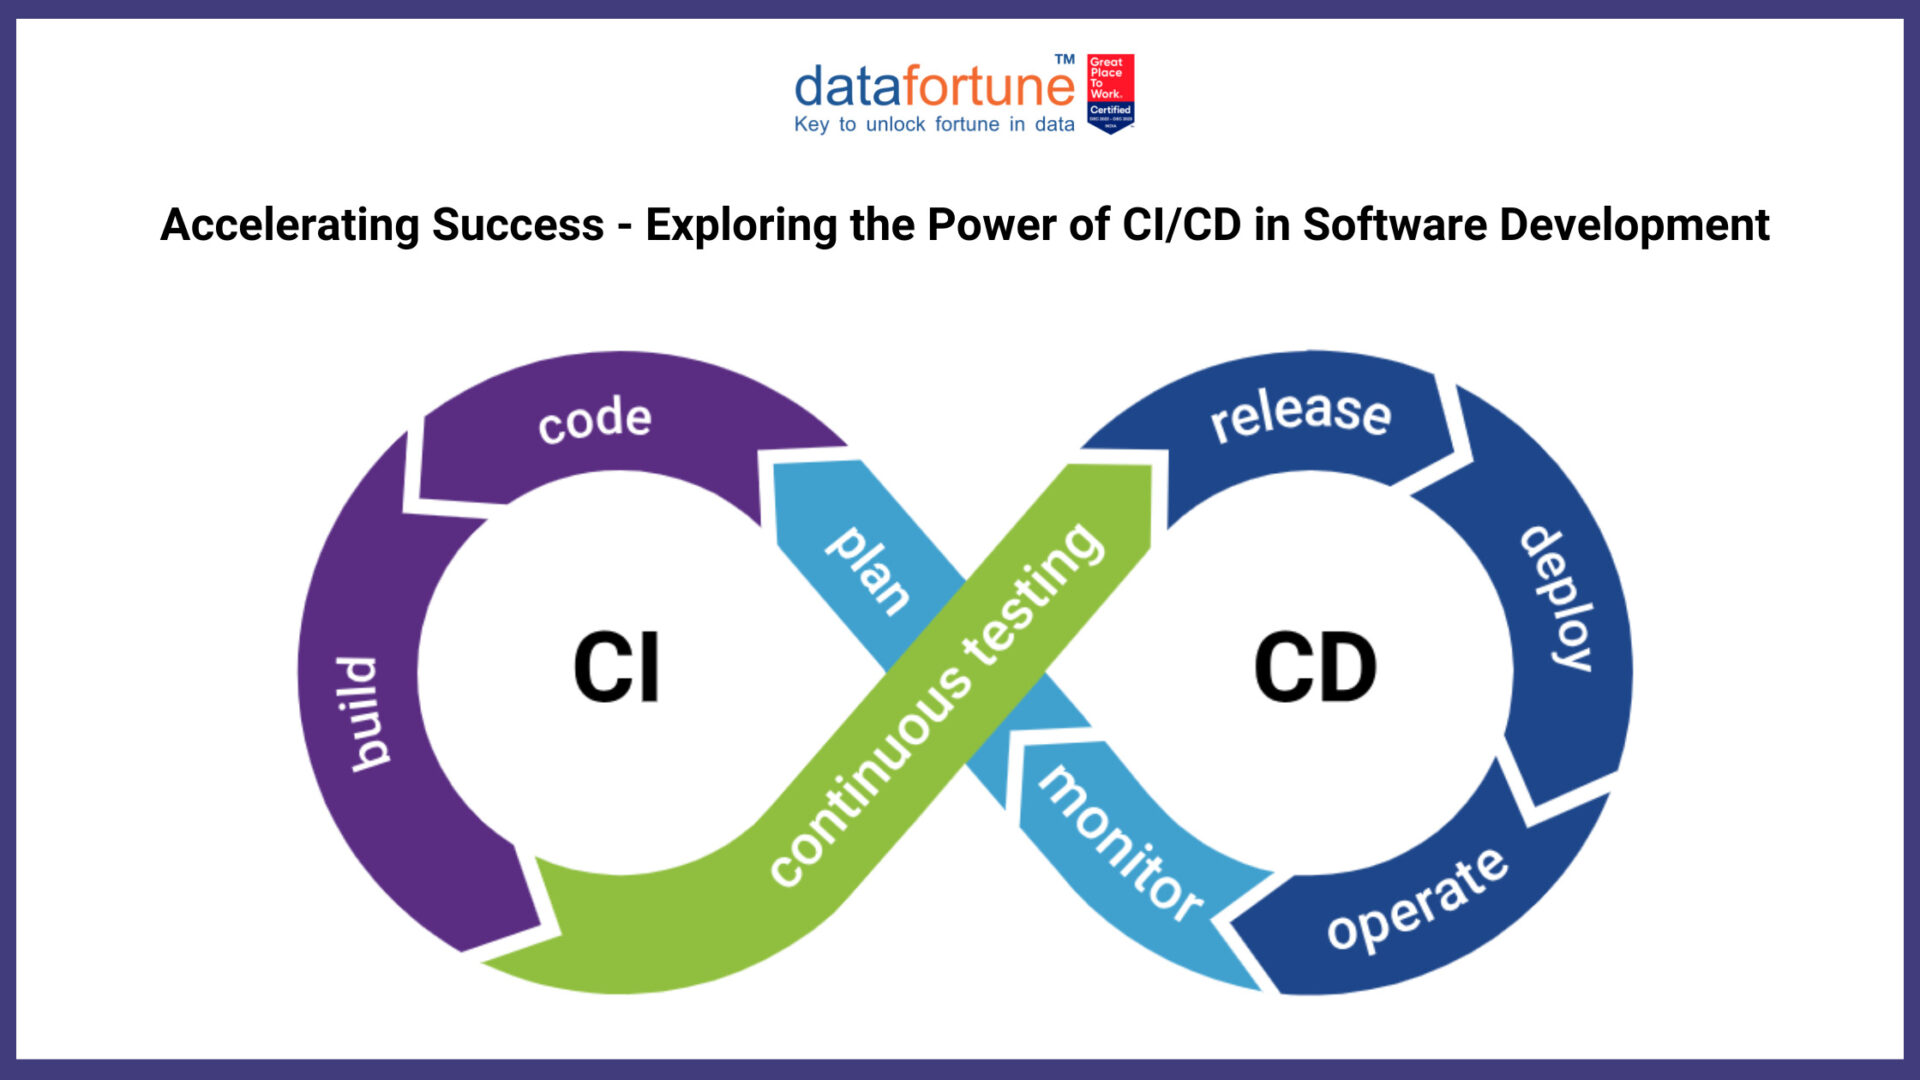 Accelerating Success - Exploring the Power of CICD in Software Development